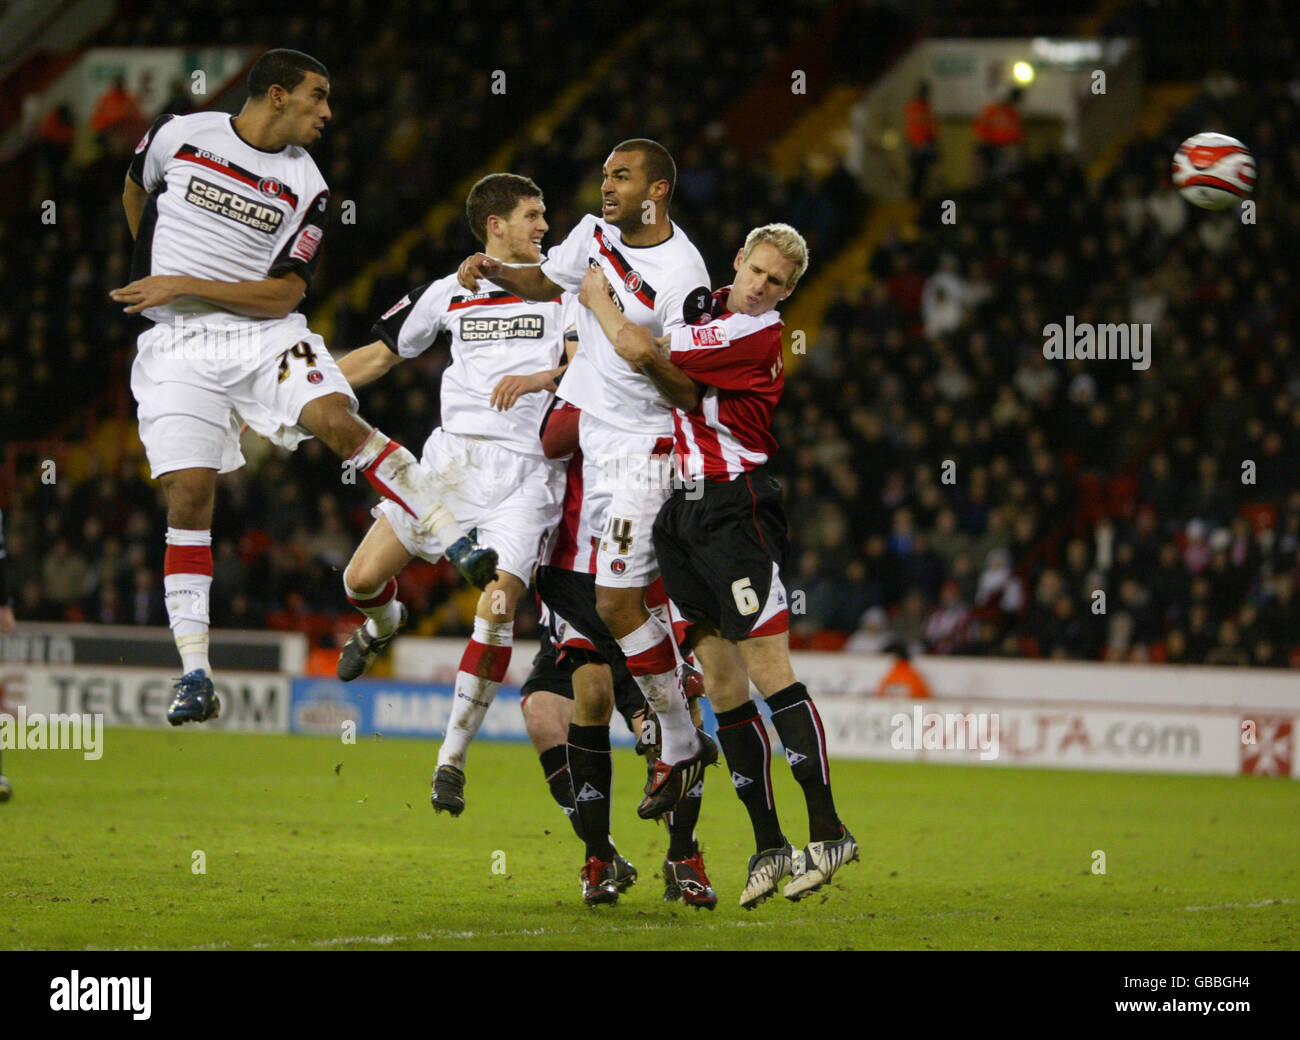 Charlton Athletic's Hameur Bouazza gets a header in on the Sheffield United goal during the Coca-Cola Championship match at Bramall Lane, Sheffield. Stock Photo